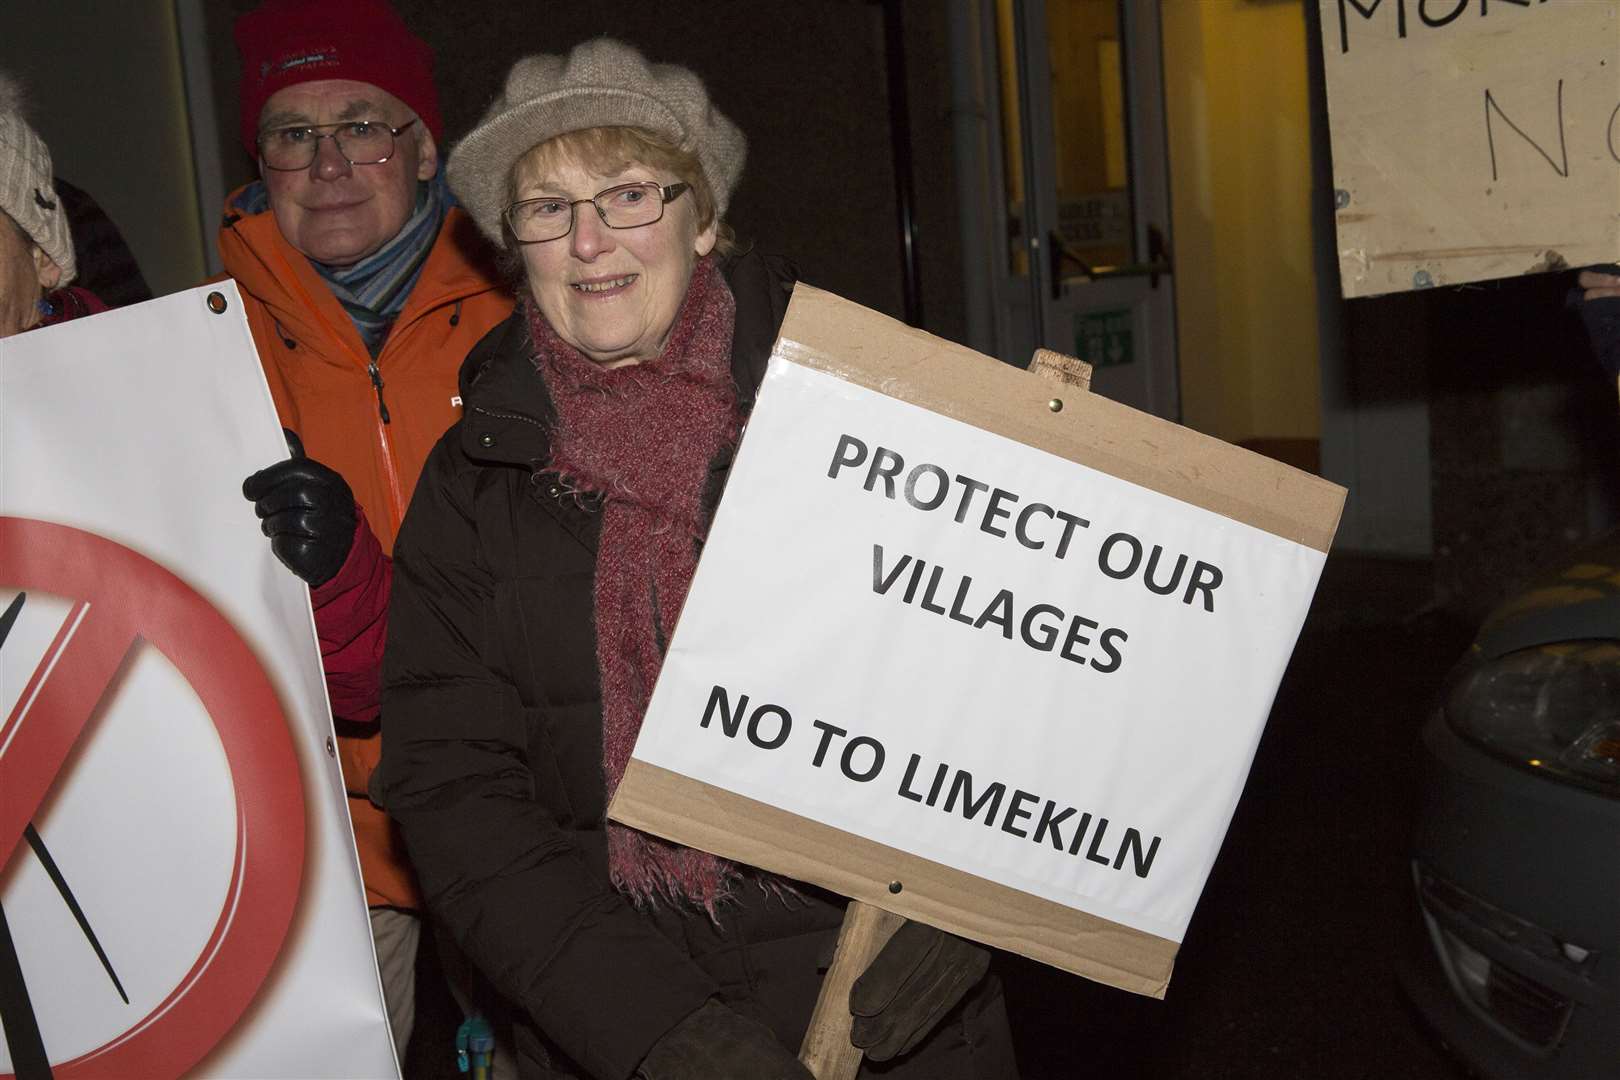 One of the protesters opposing the controversial Limekiln scheme. Picture: Robert MacDonald / Northern Studios